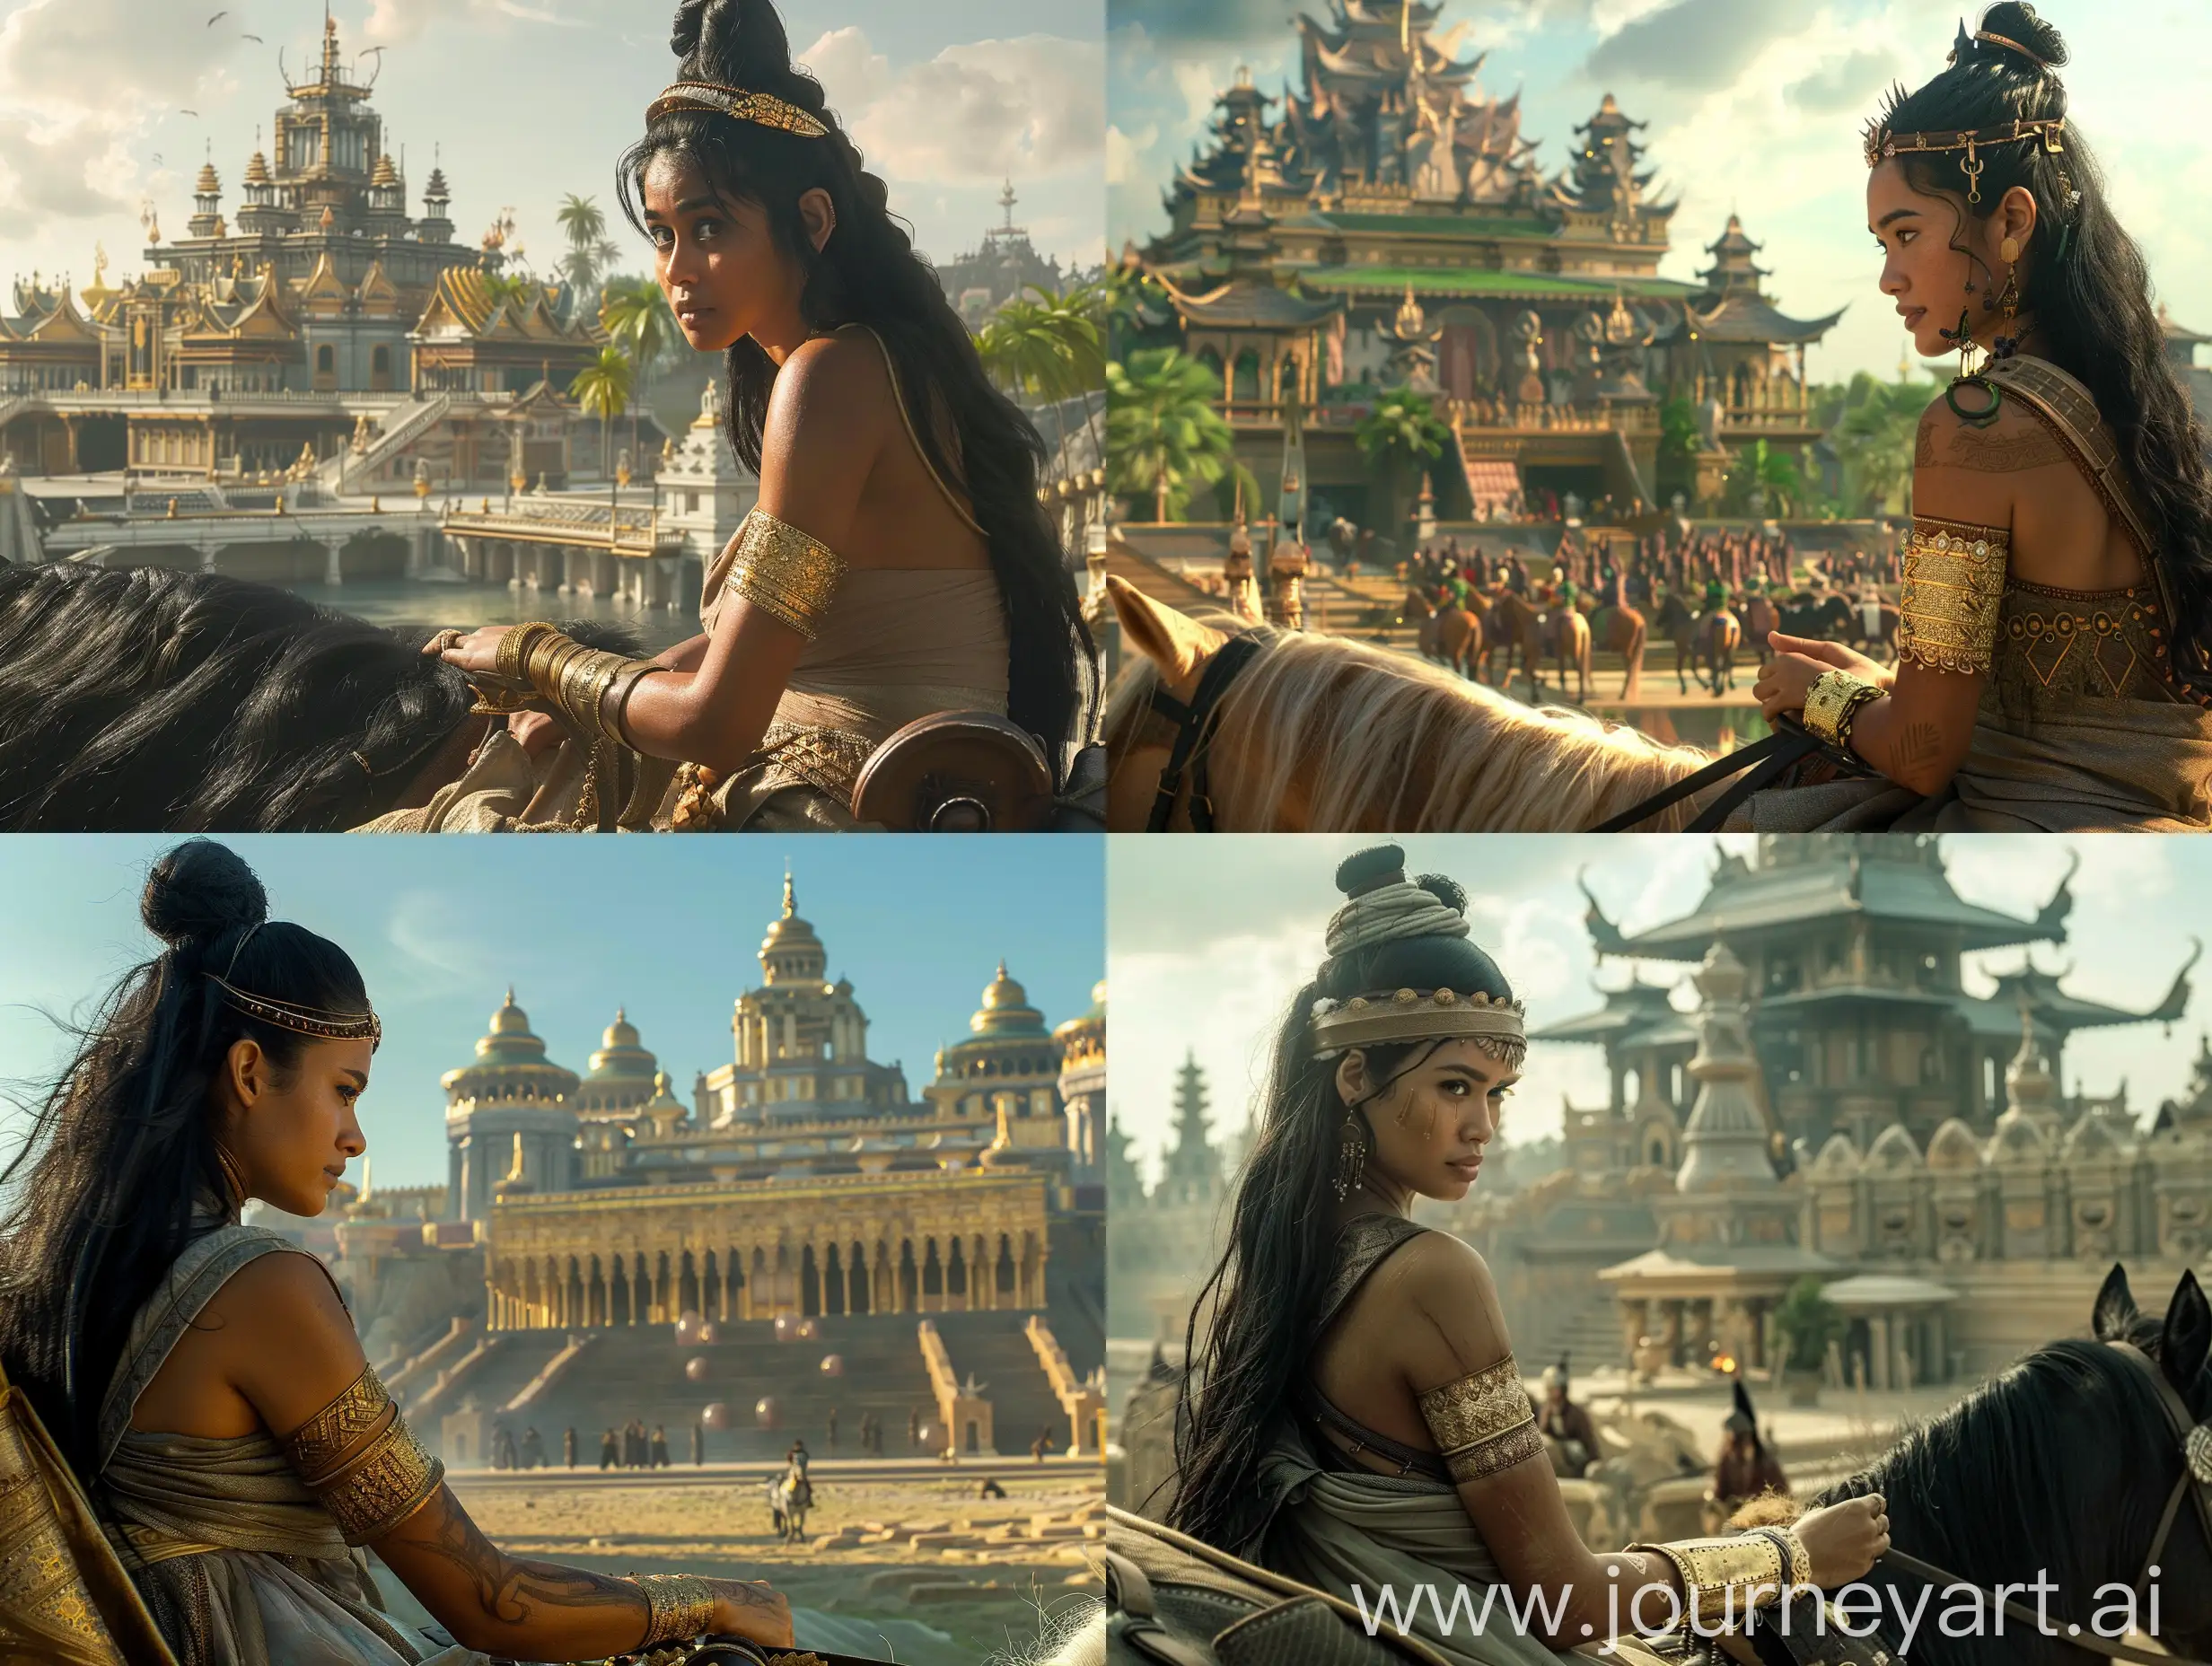 Cinematic panorama of the Sunda Kingdom of Pajajaran in the afternoon. A woman with long black hair, hair tied in a bun, wearing a headband, wearing a dress and gold jewelry on her arms, sits on a horse around the royal palace. --v 6 --ar 16:9